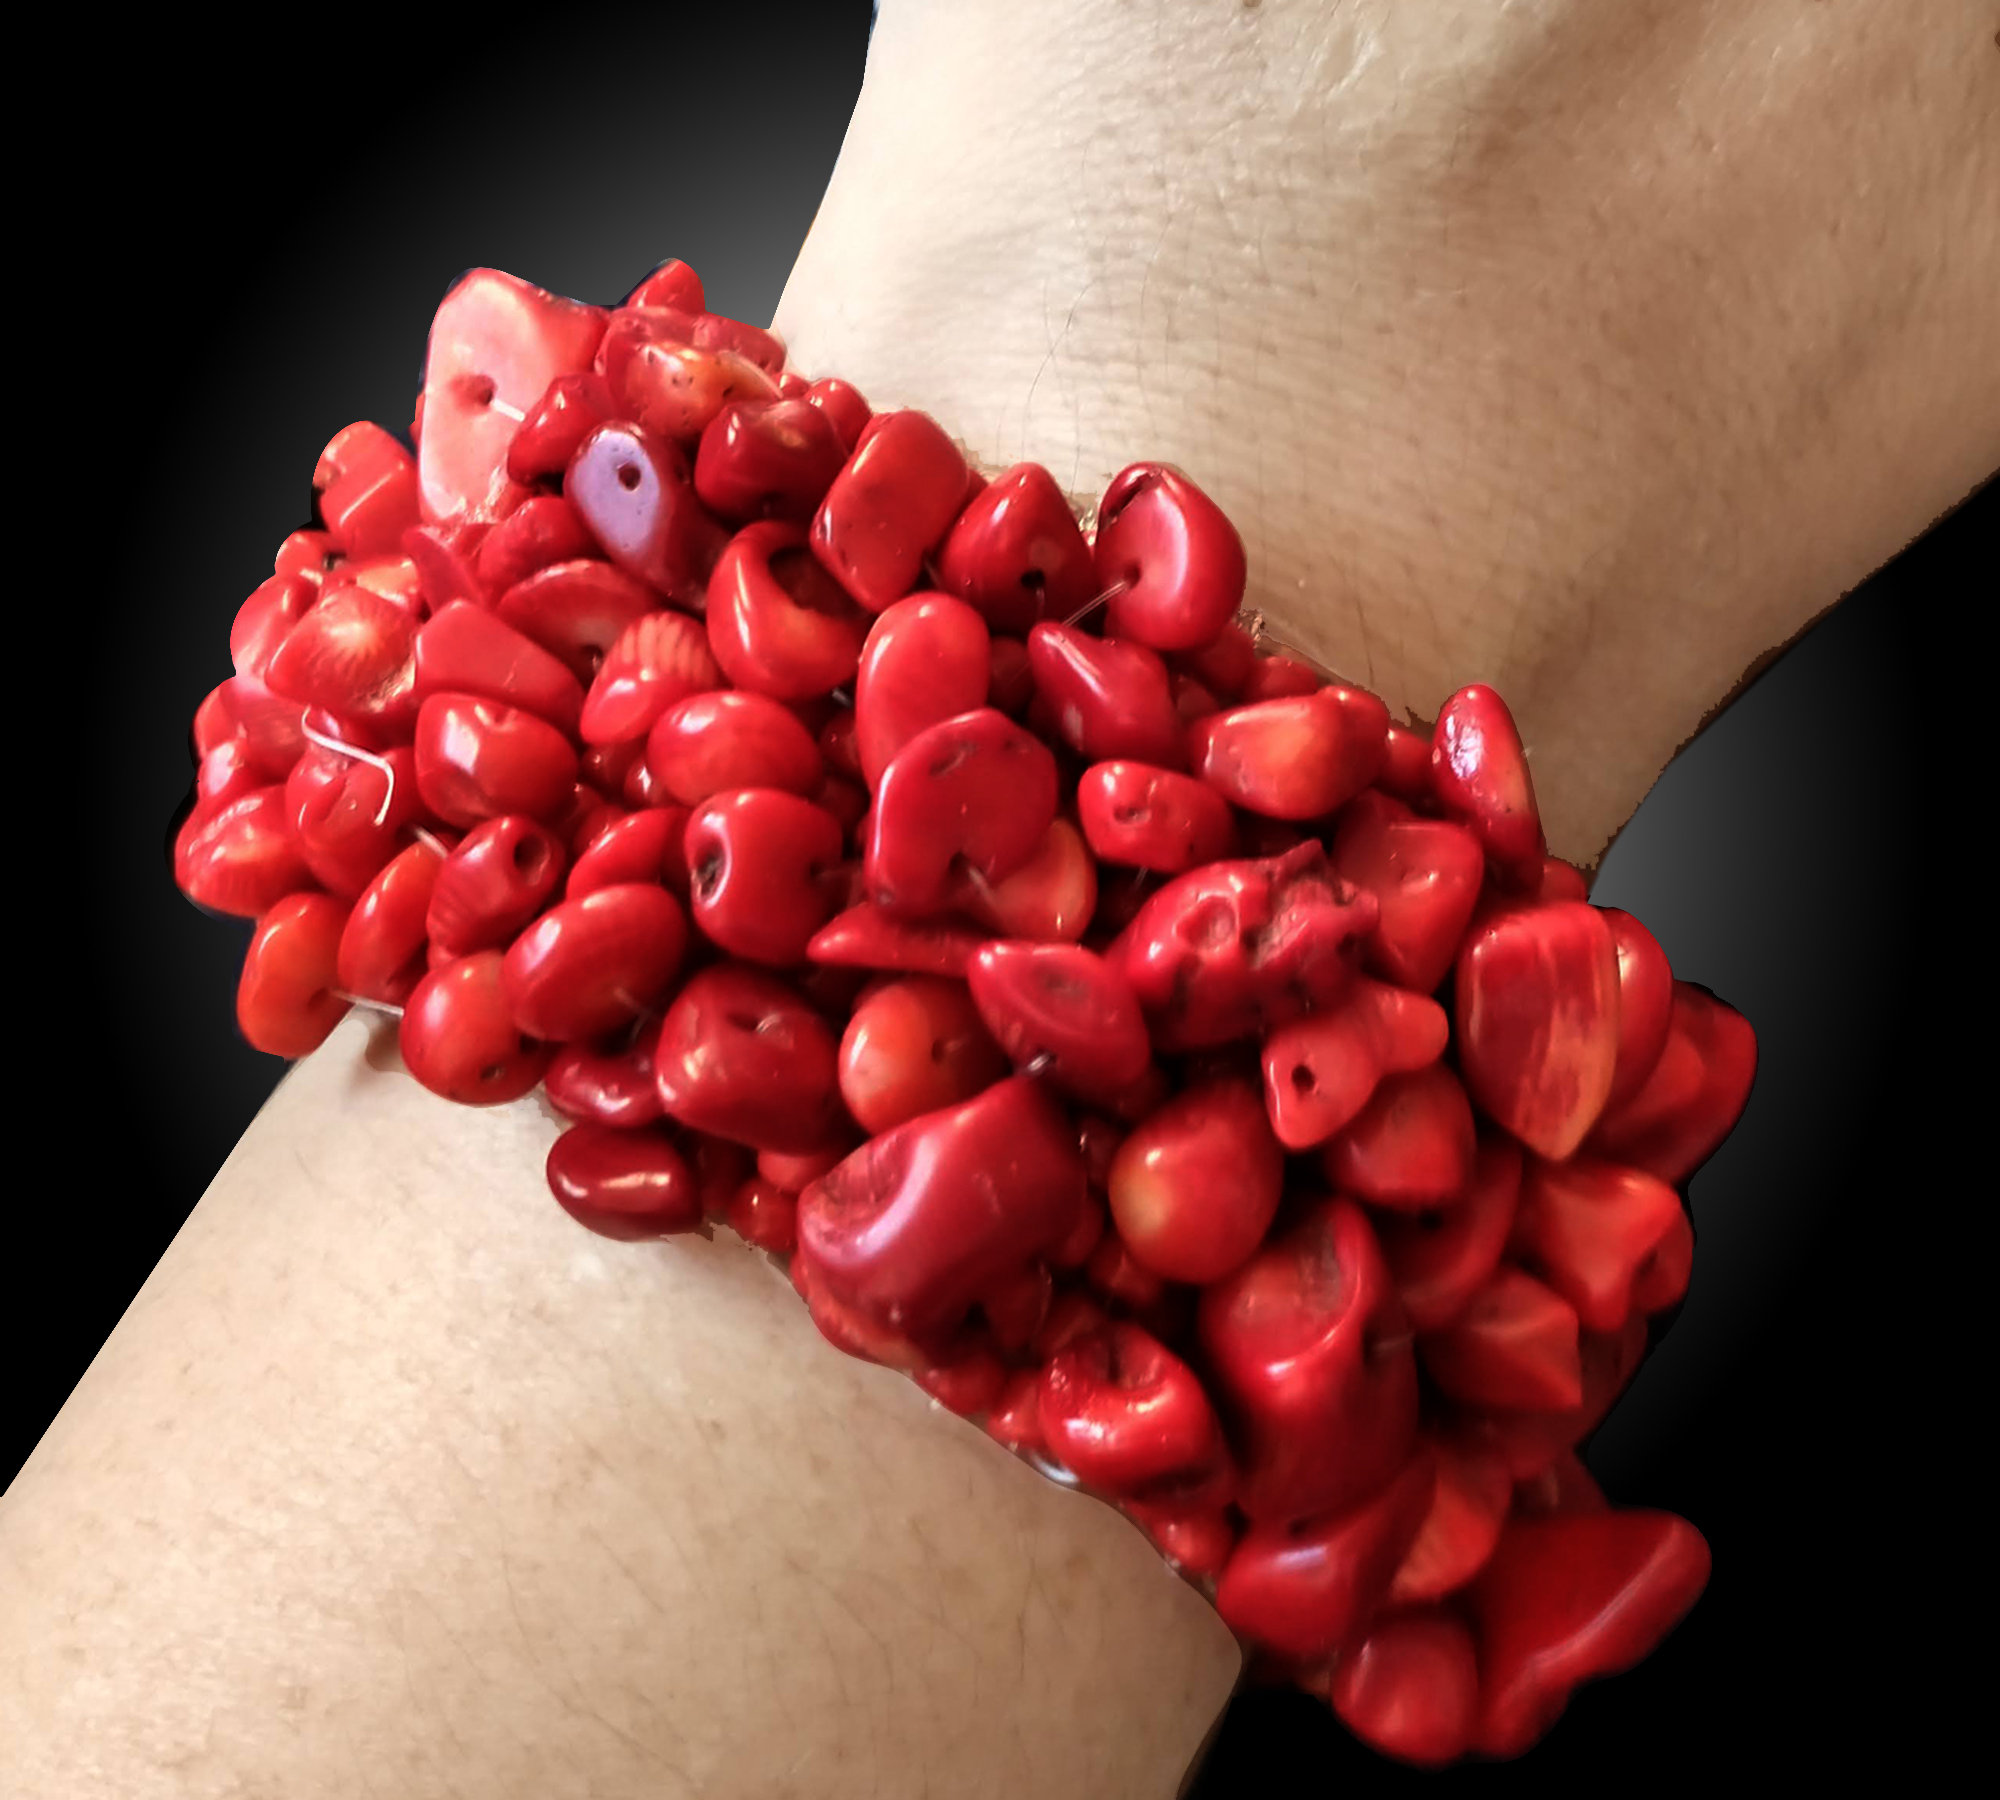 Vintage Beautiful red Stretch plastic Bracelet 1”W Beads Good condition